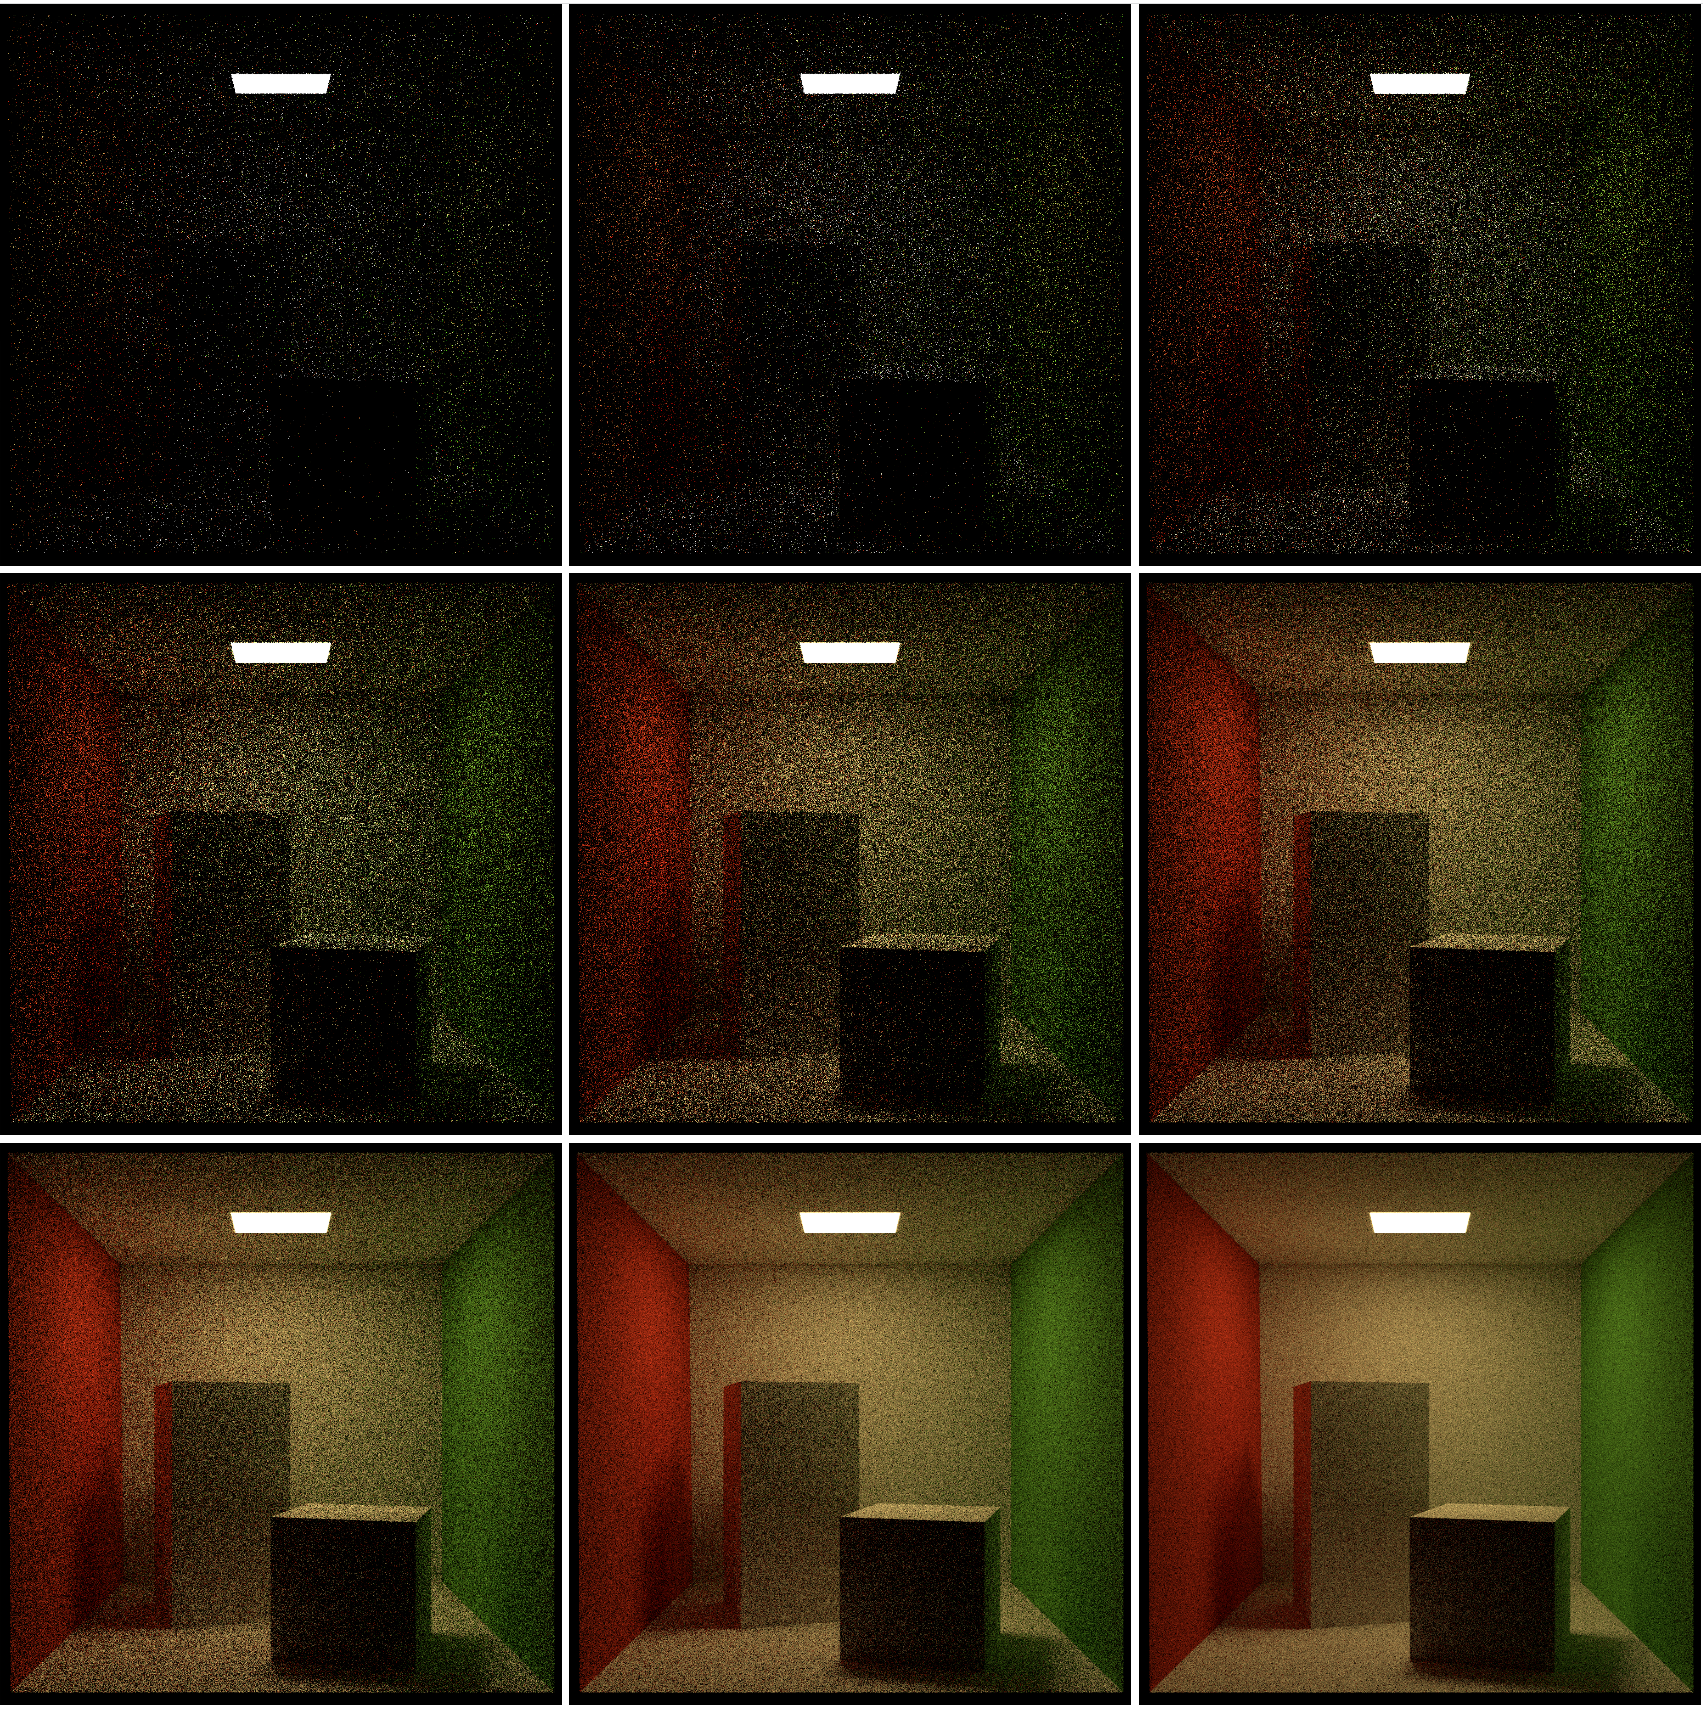 Cornell Box rendered with different sample per pixel counts